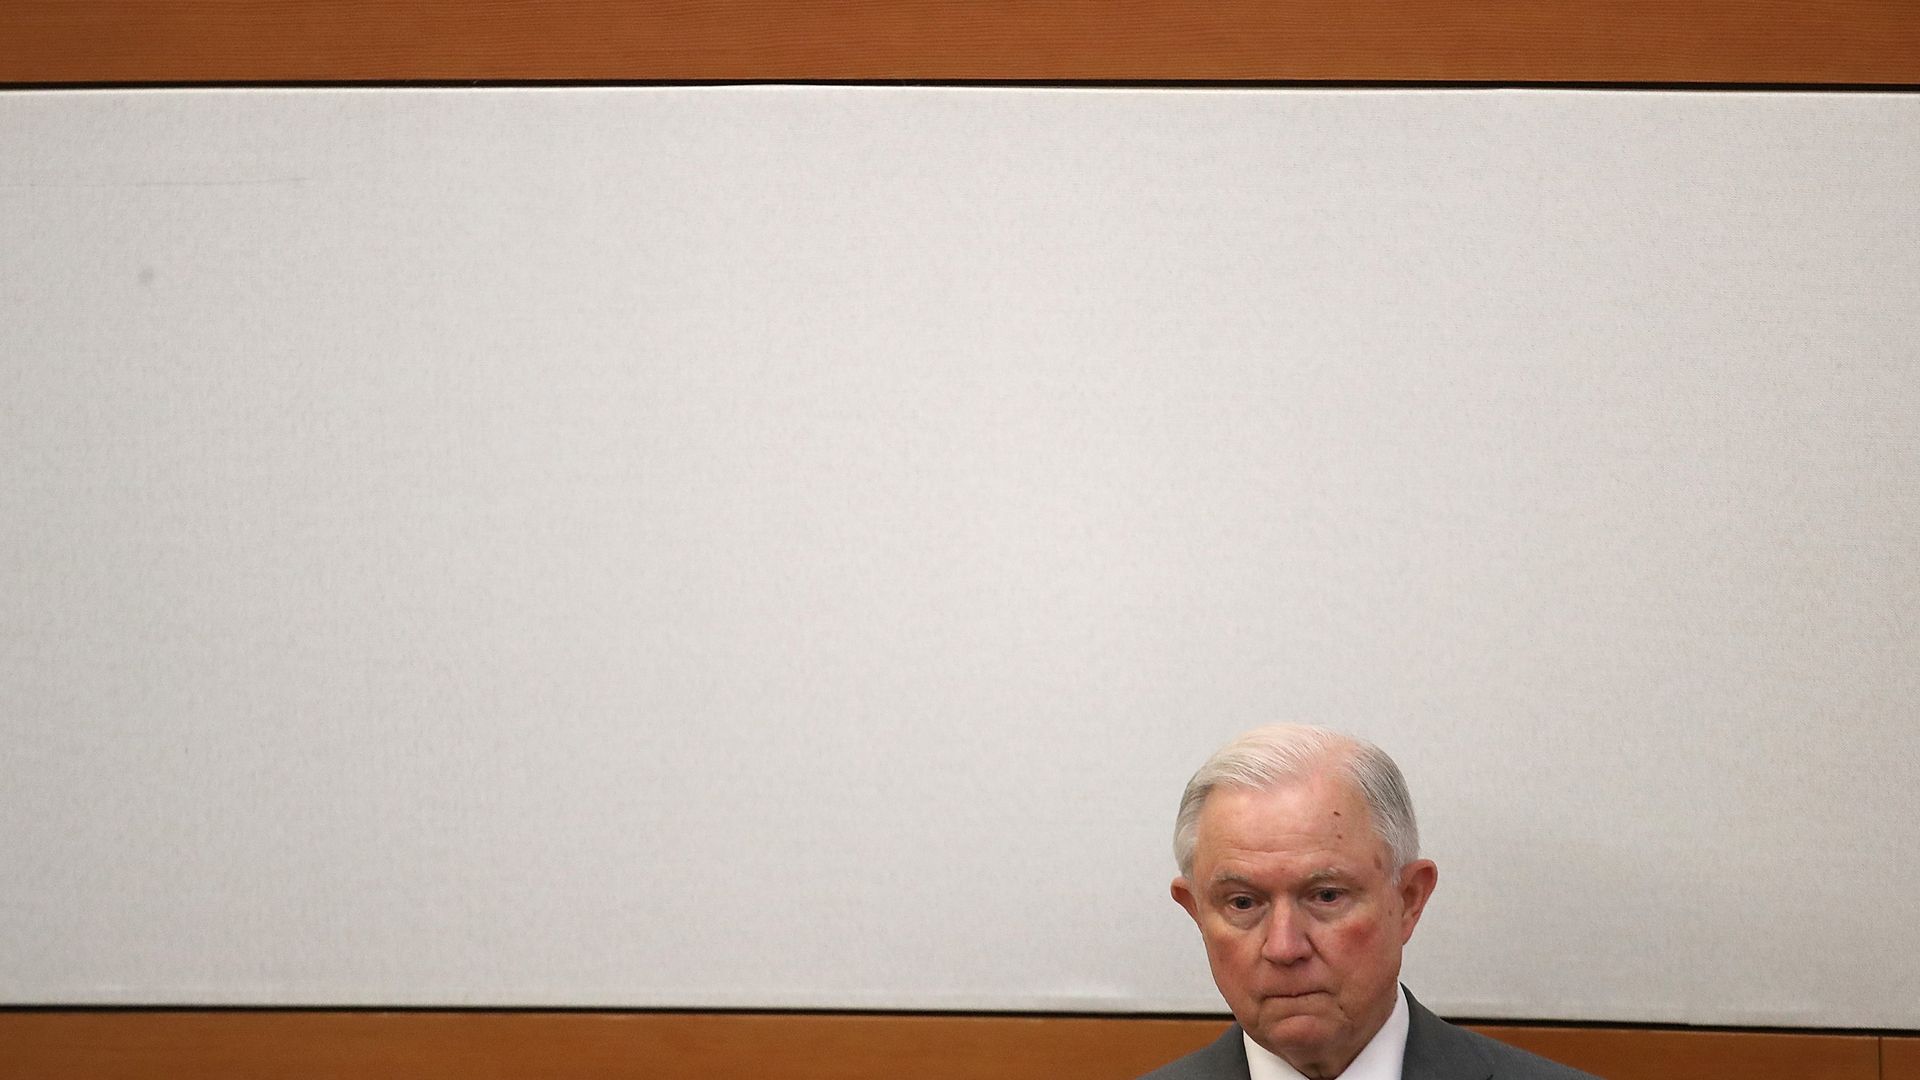 Attorney General Jeff Sessions' head at the bottom right side of the photograph with a wall with wooden, horizontal planks in the background. 